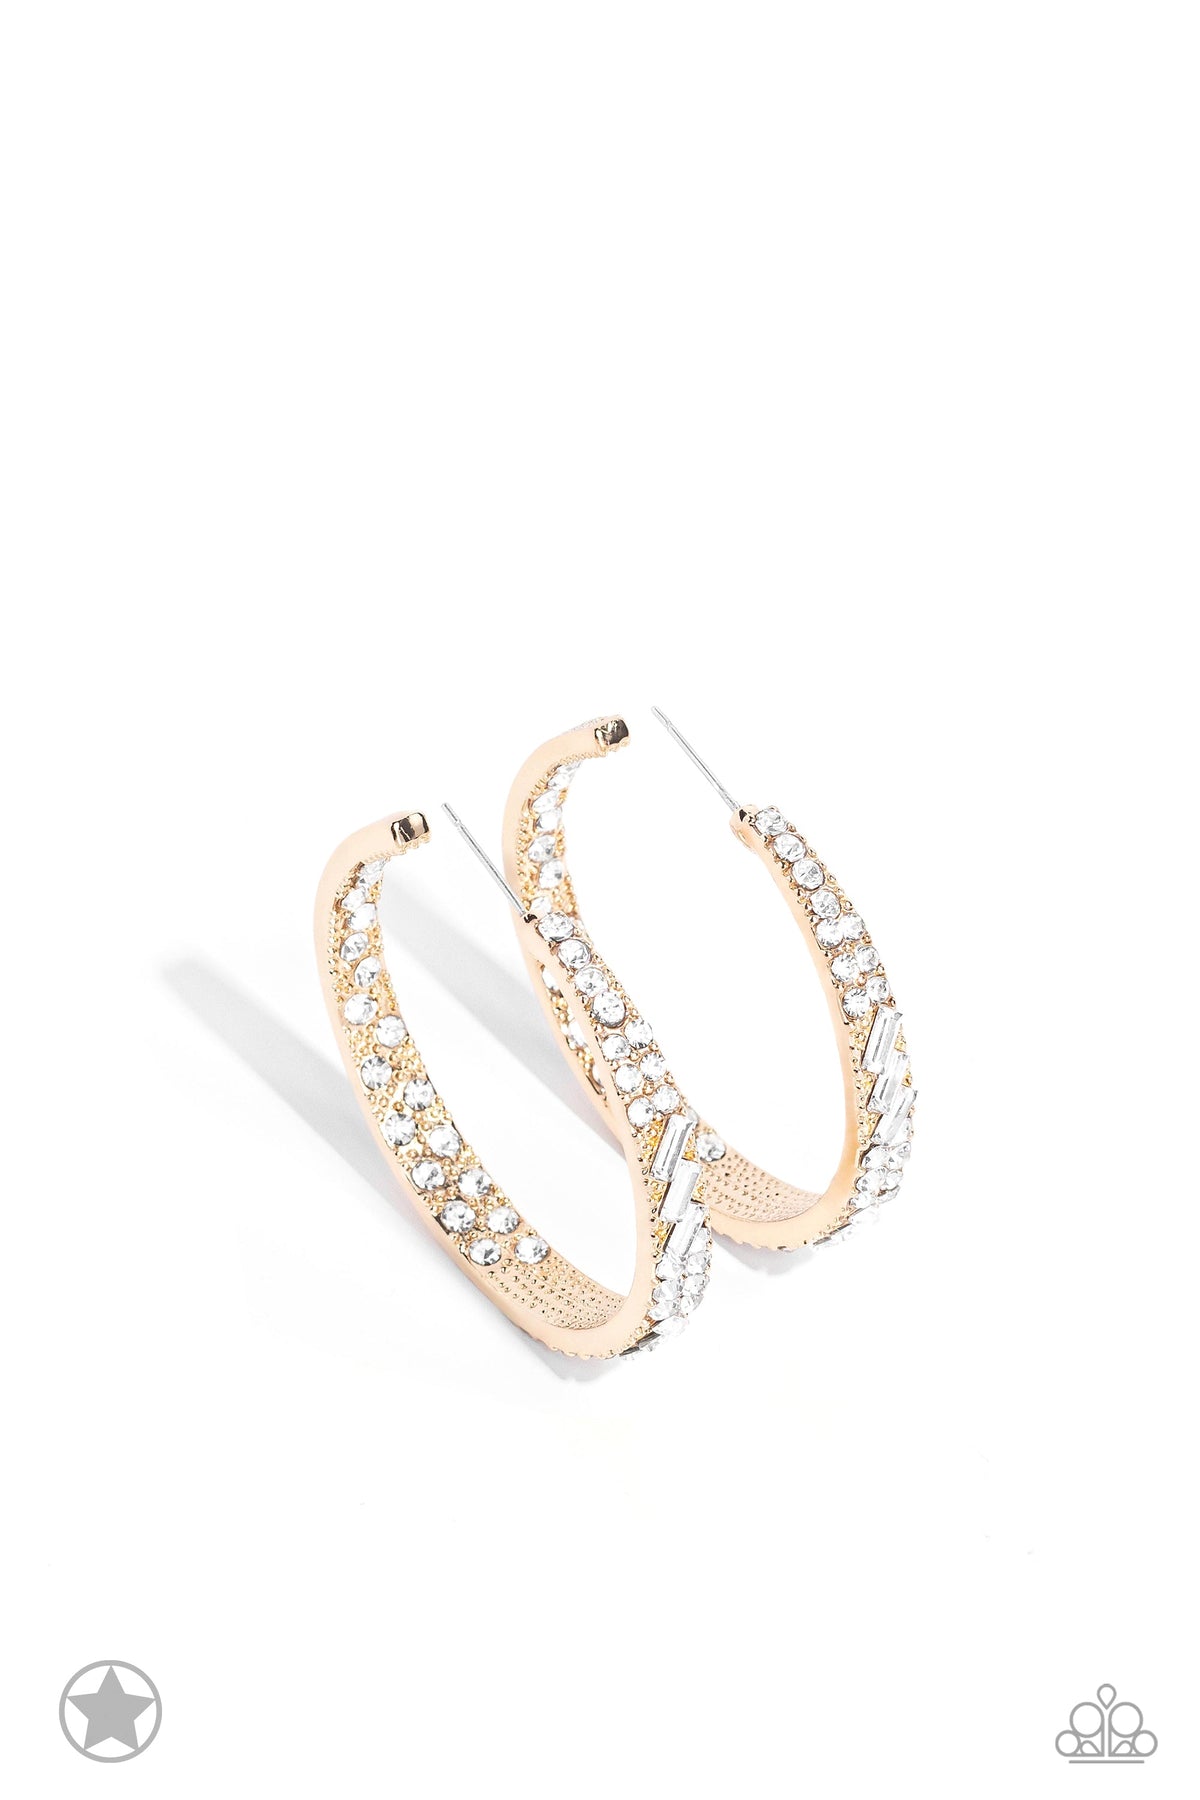 GLITZY By Association Gold &amp; White Rhinestone Hoop Earrings - Paparazzi Accessories- lightbox - CarasShop.com - $5 Jewelry by Cara Jewels